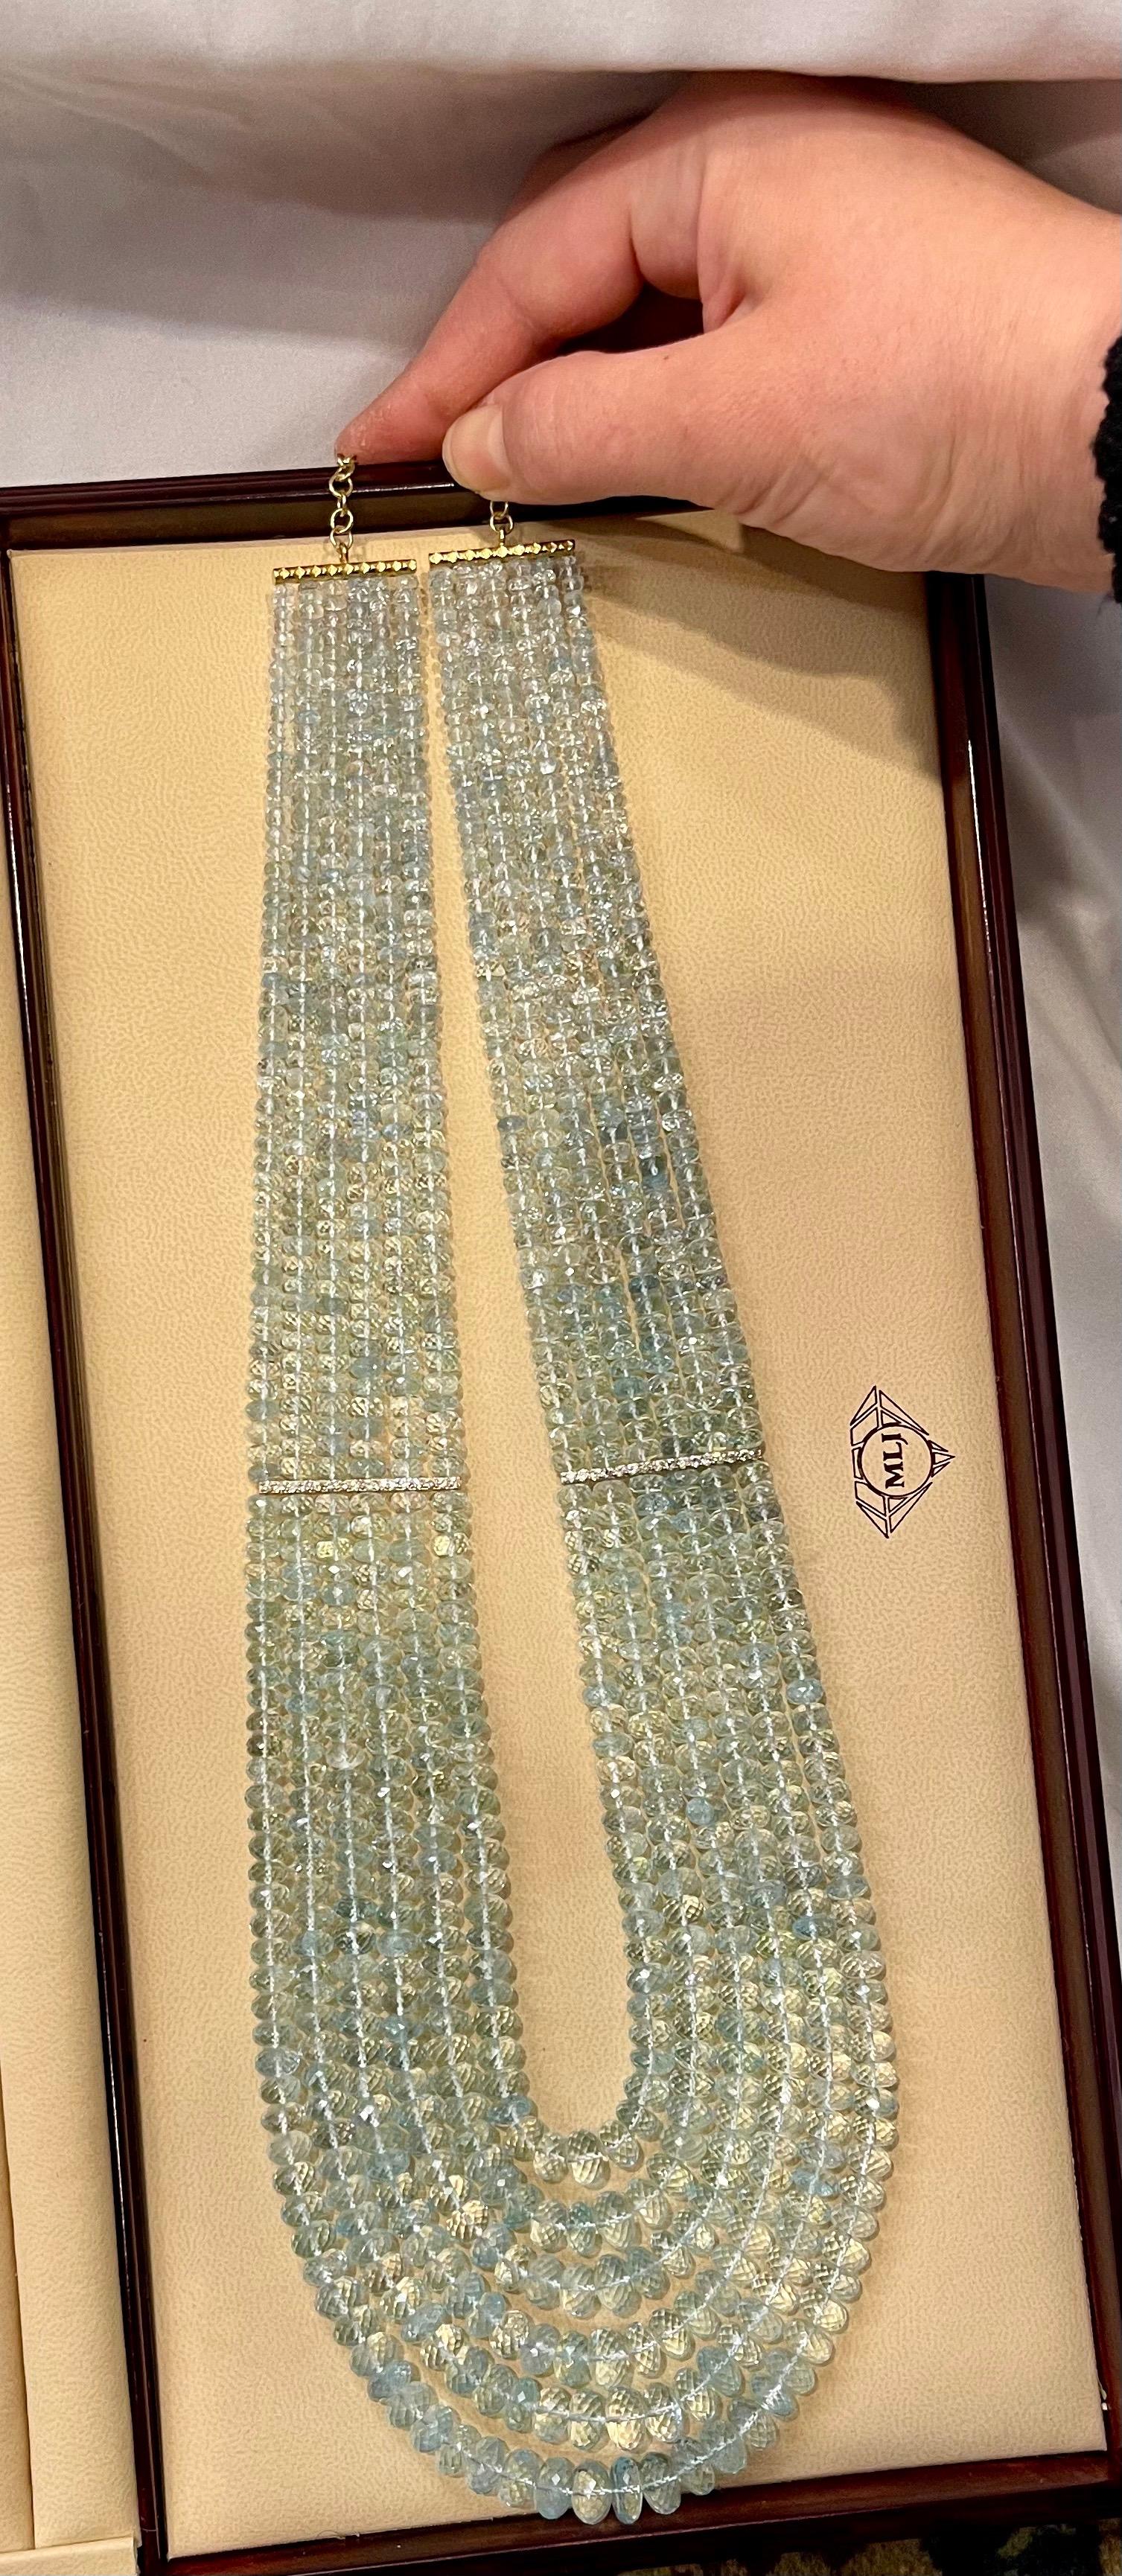 1100 Ct 6 Layer Natural Aquamarine Bead Necklace 14 Kt Gold and Diamond Necklace For Sale 10